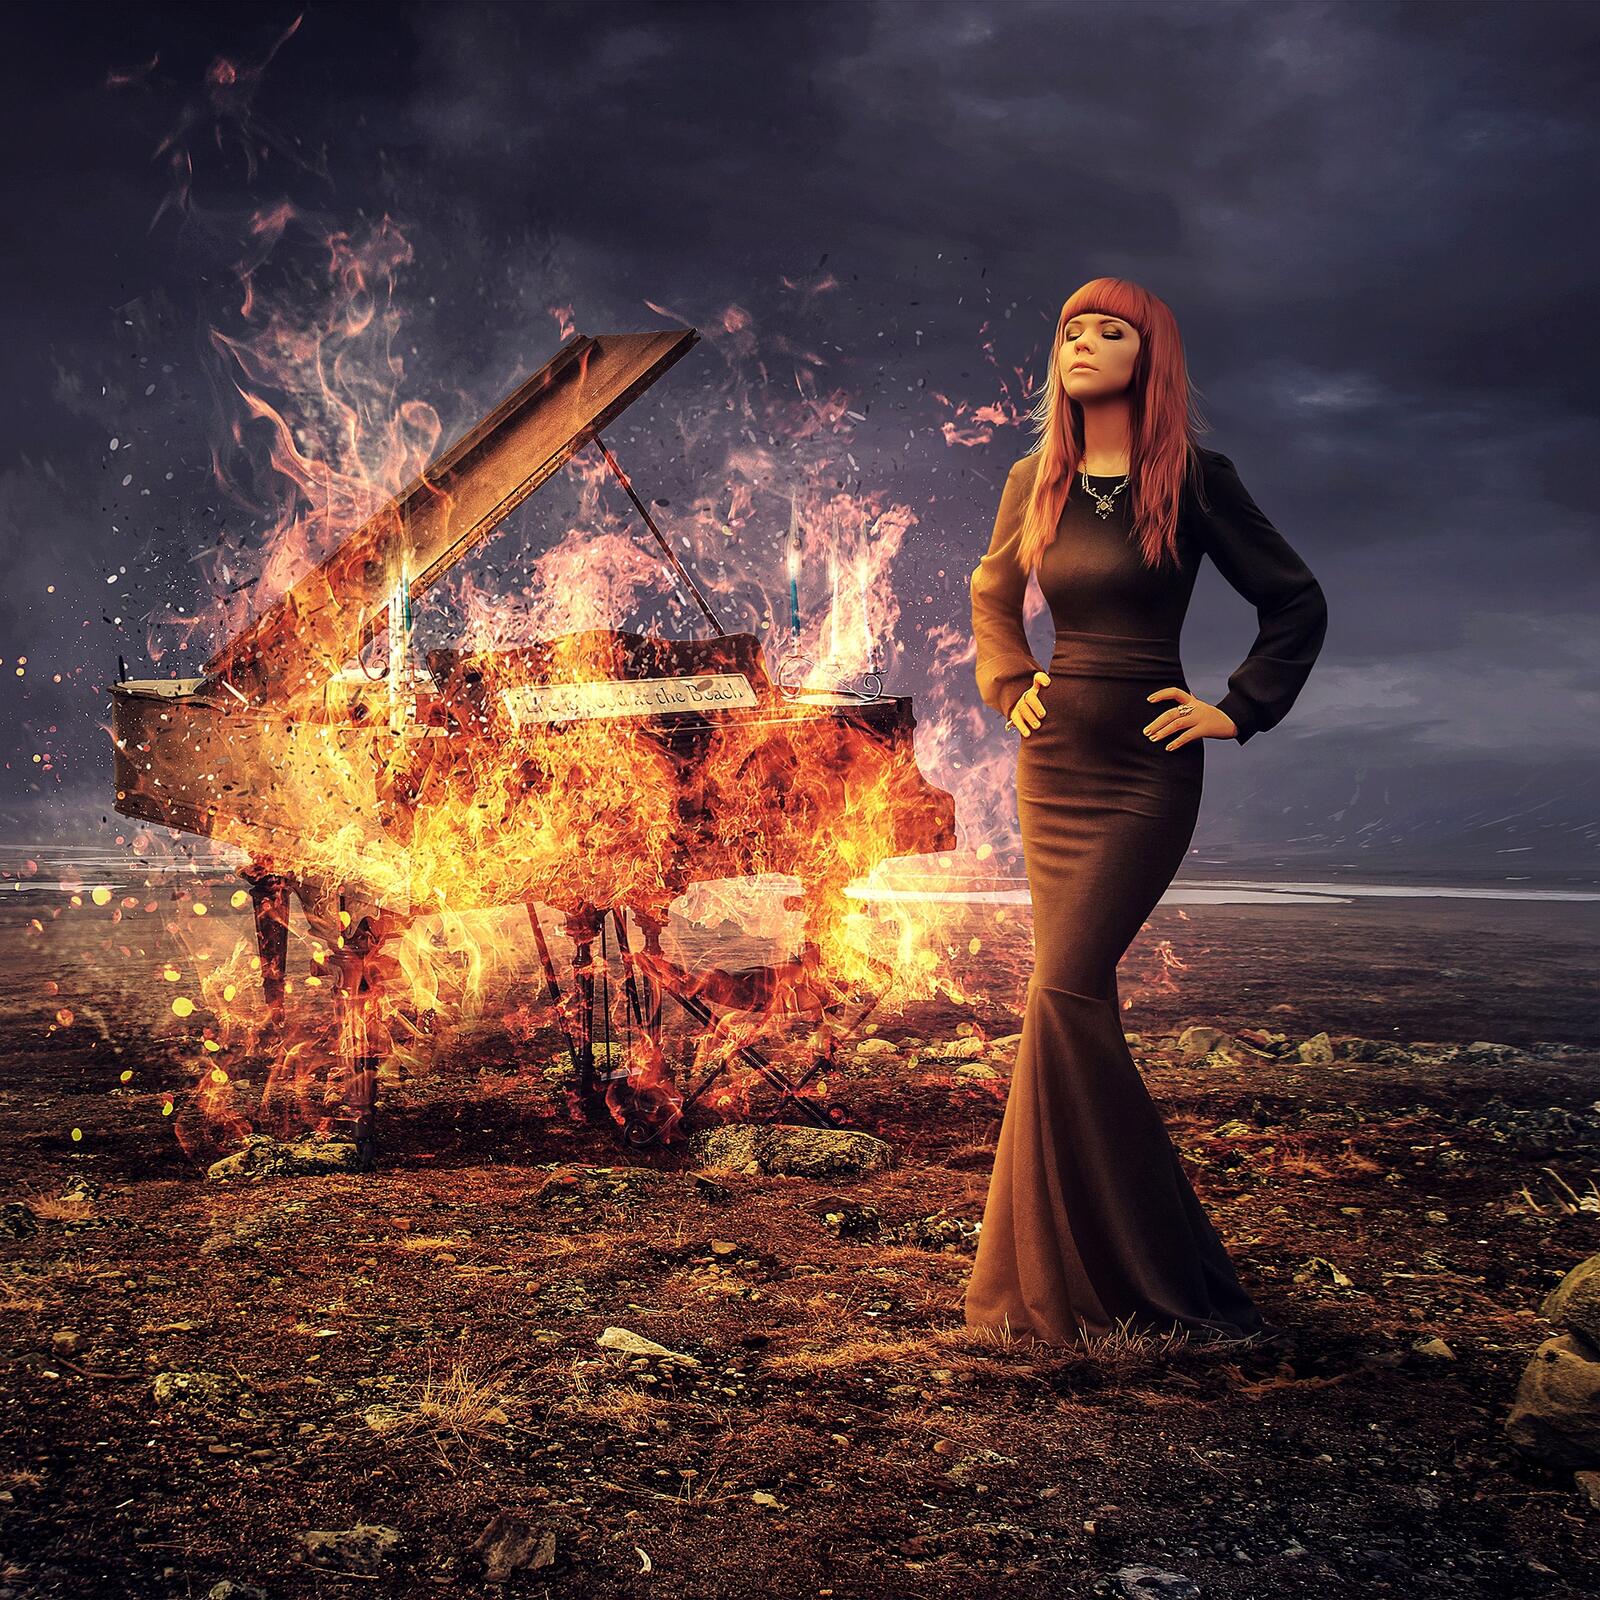 Wallpapers the girl a burning piano fantasy on the desktop